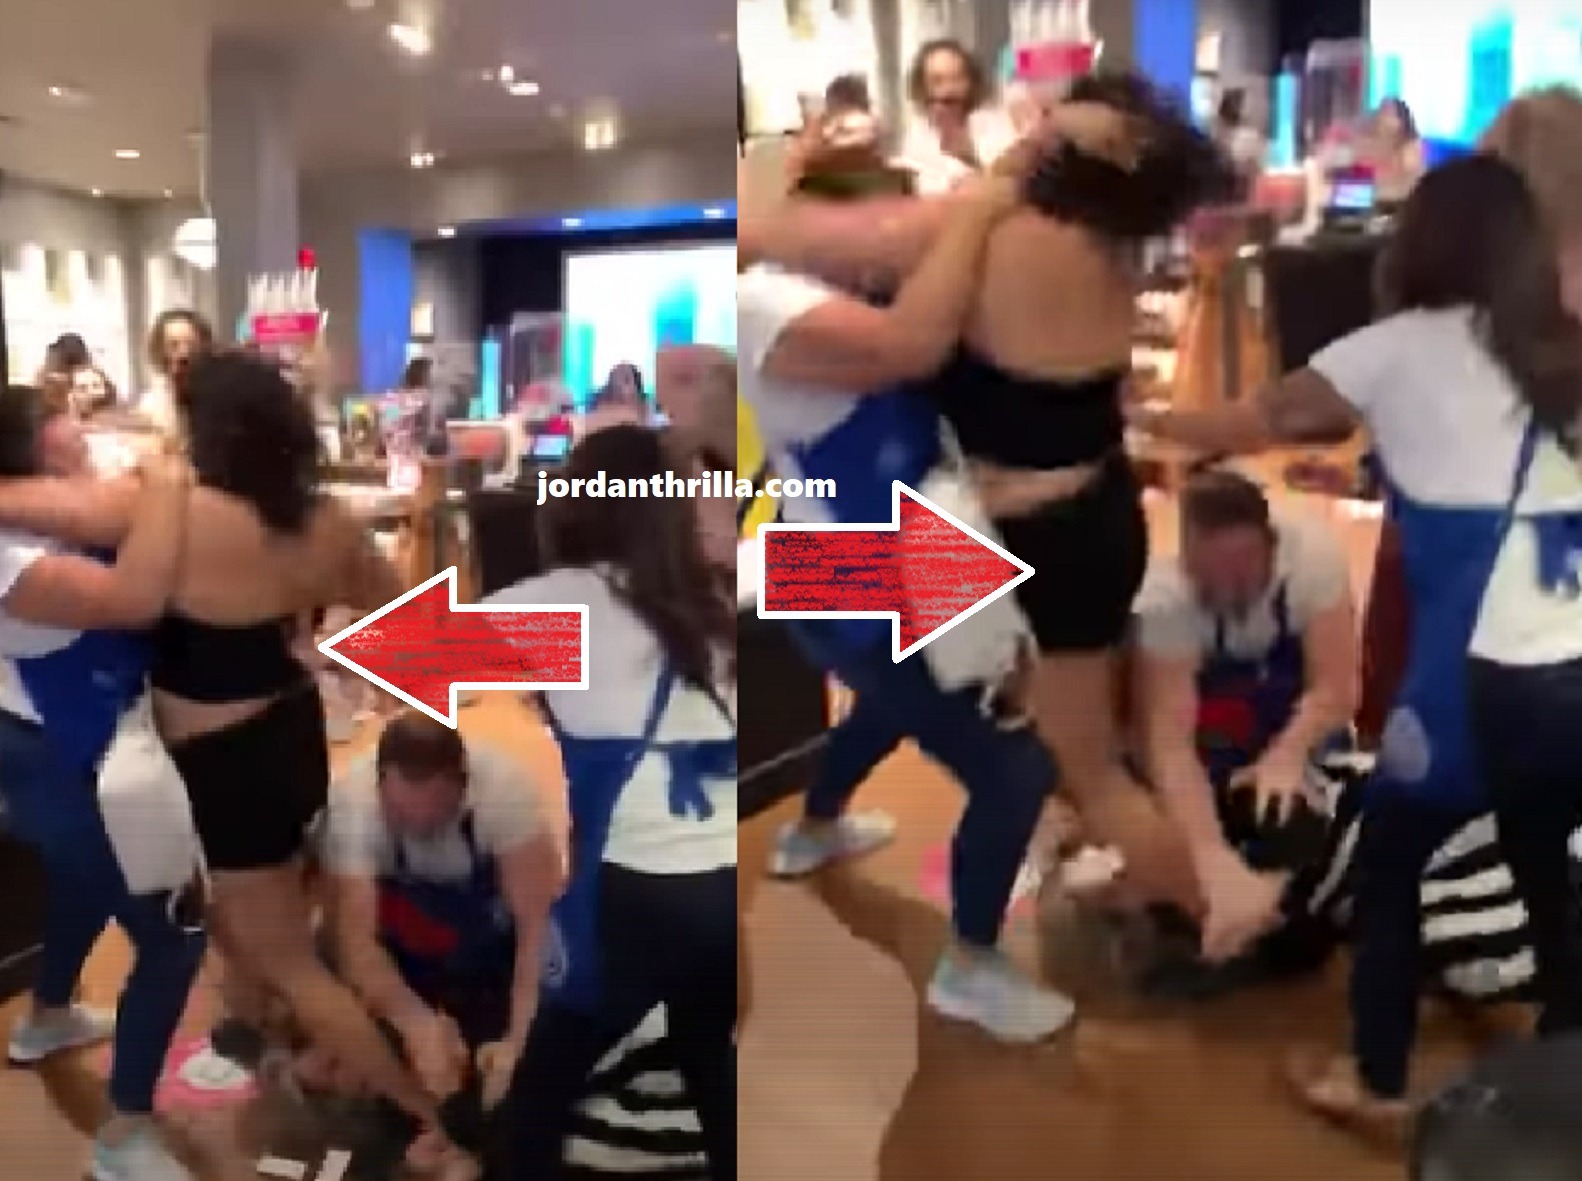 Woman wearing Two piece outfit in Massive Brawl Fight at Fashion Square Mall Bath and Body Works Store Between Multiple Women